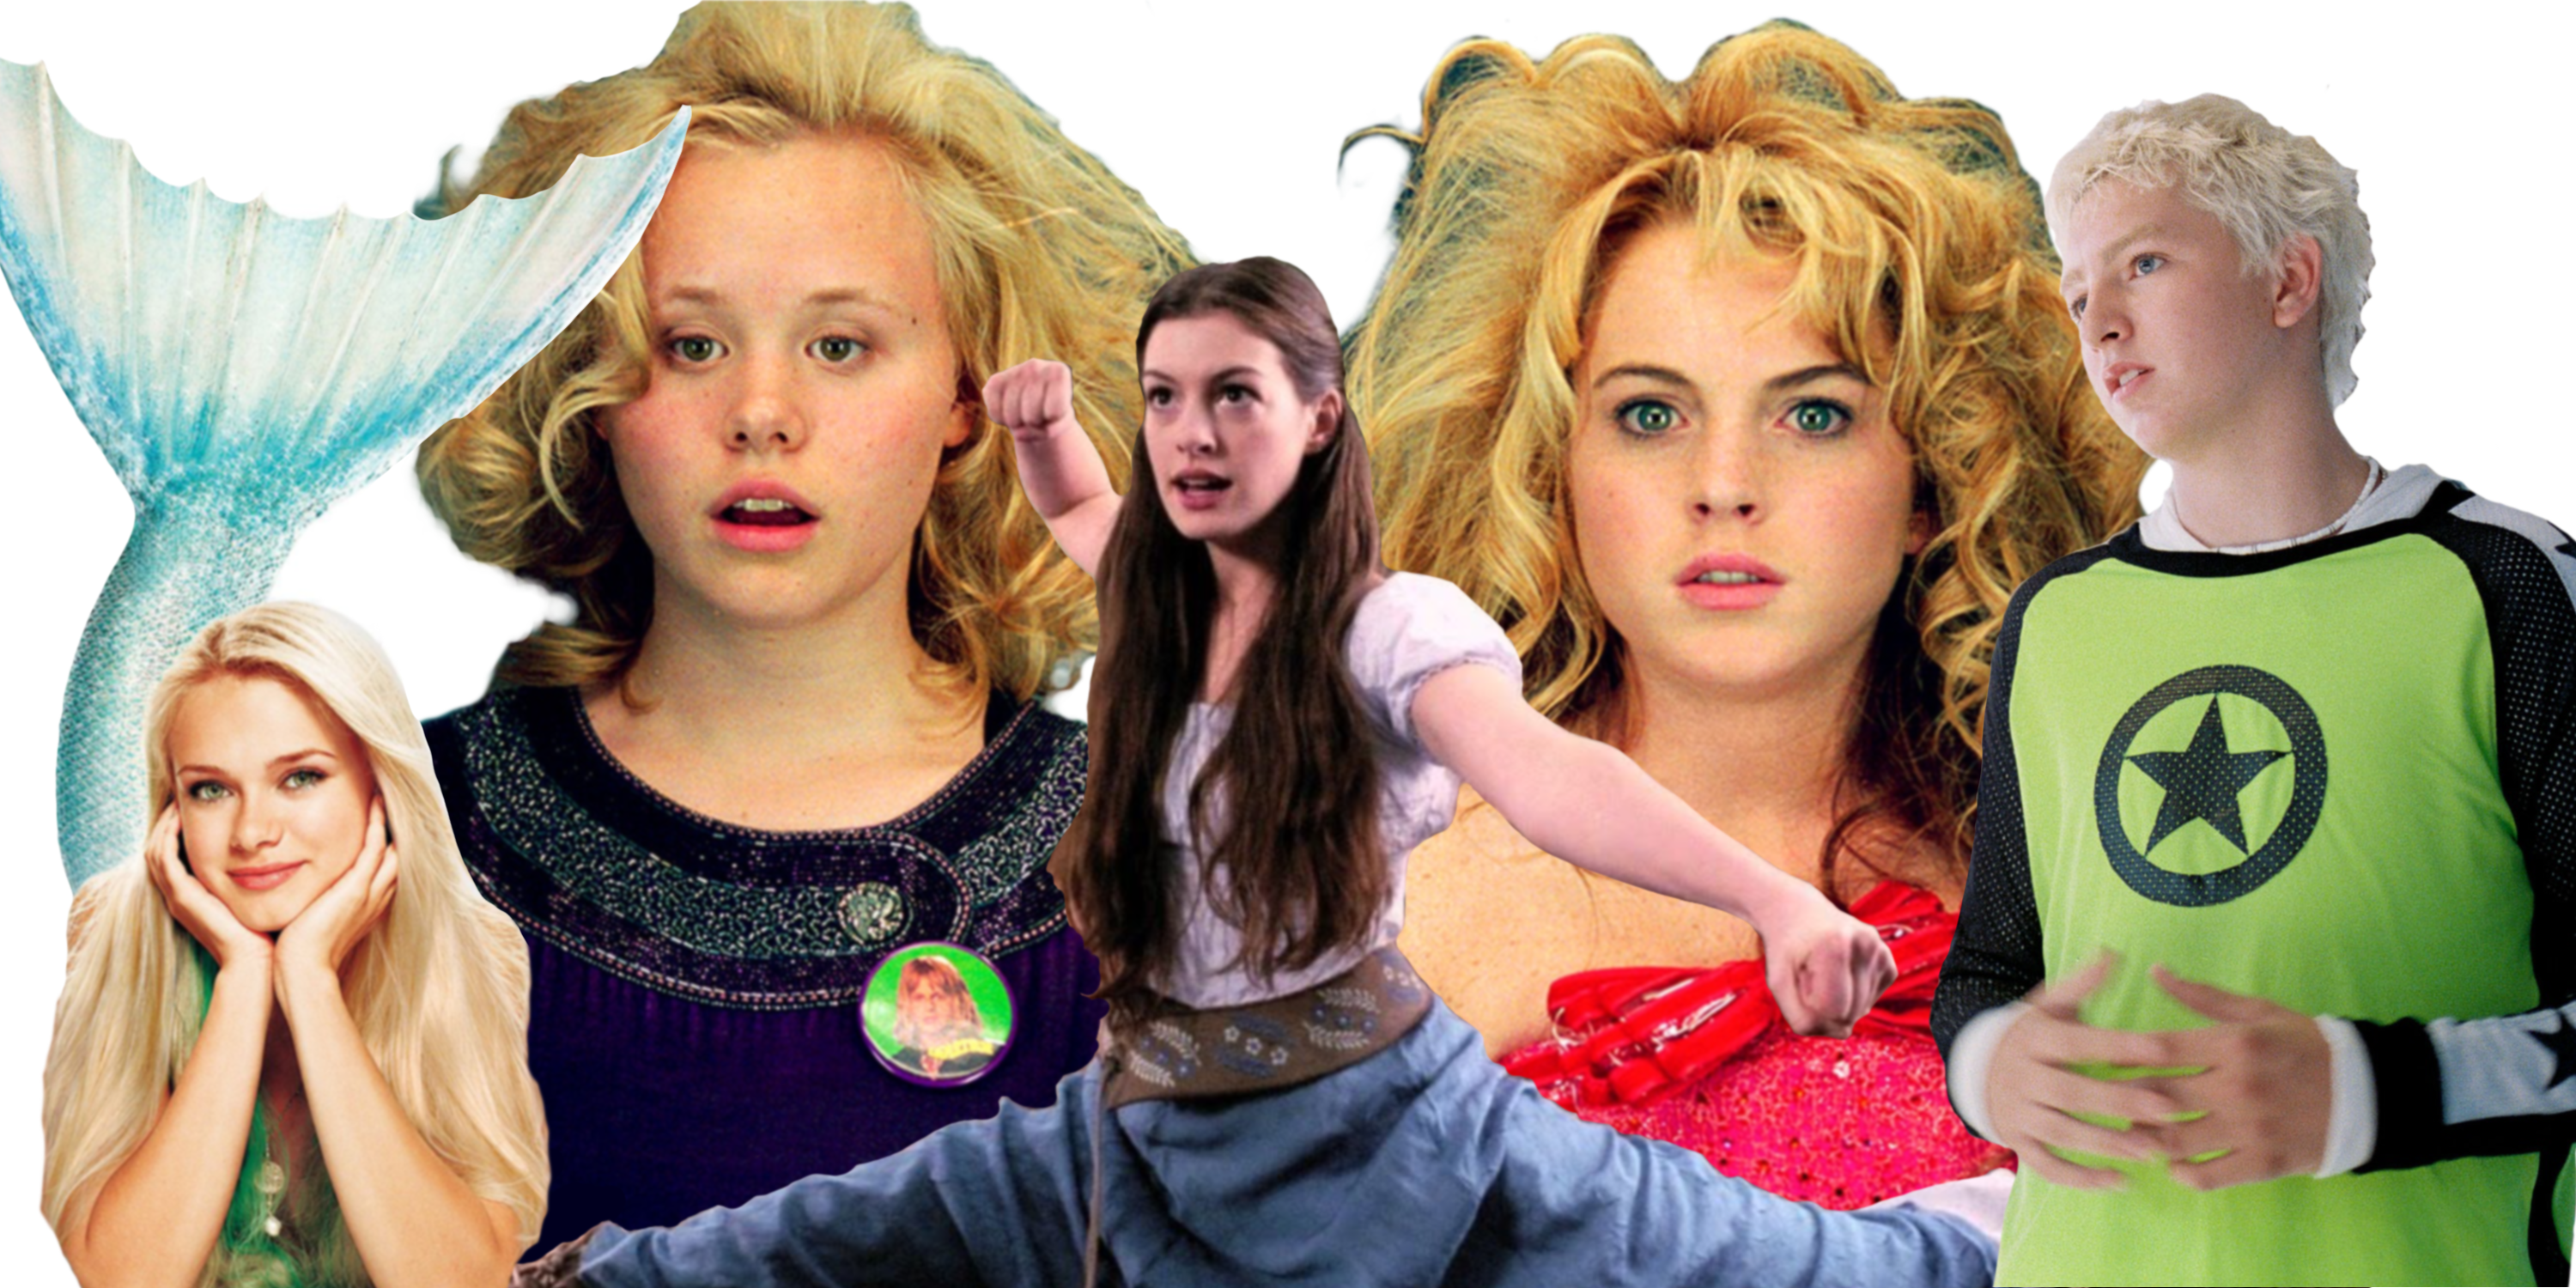 Mindless Minute: The Disney Princess remake of 'Mean Girls